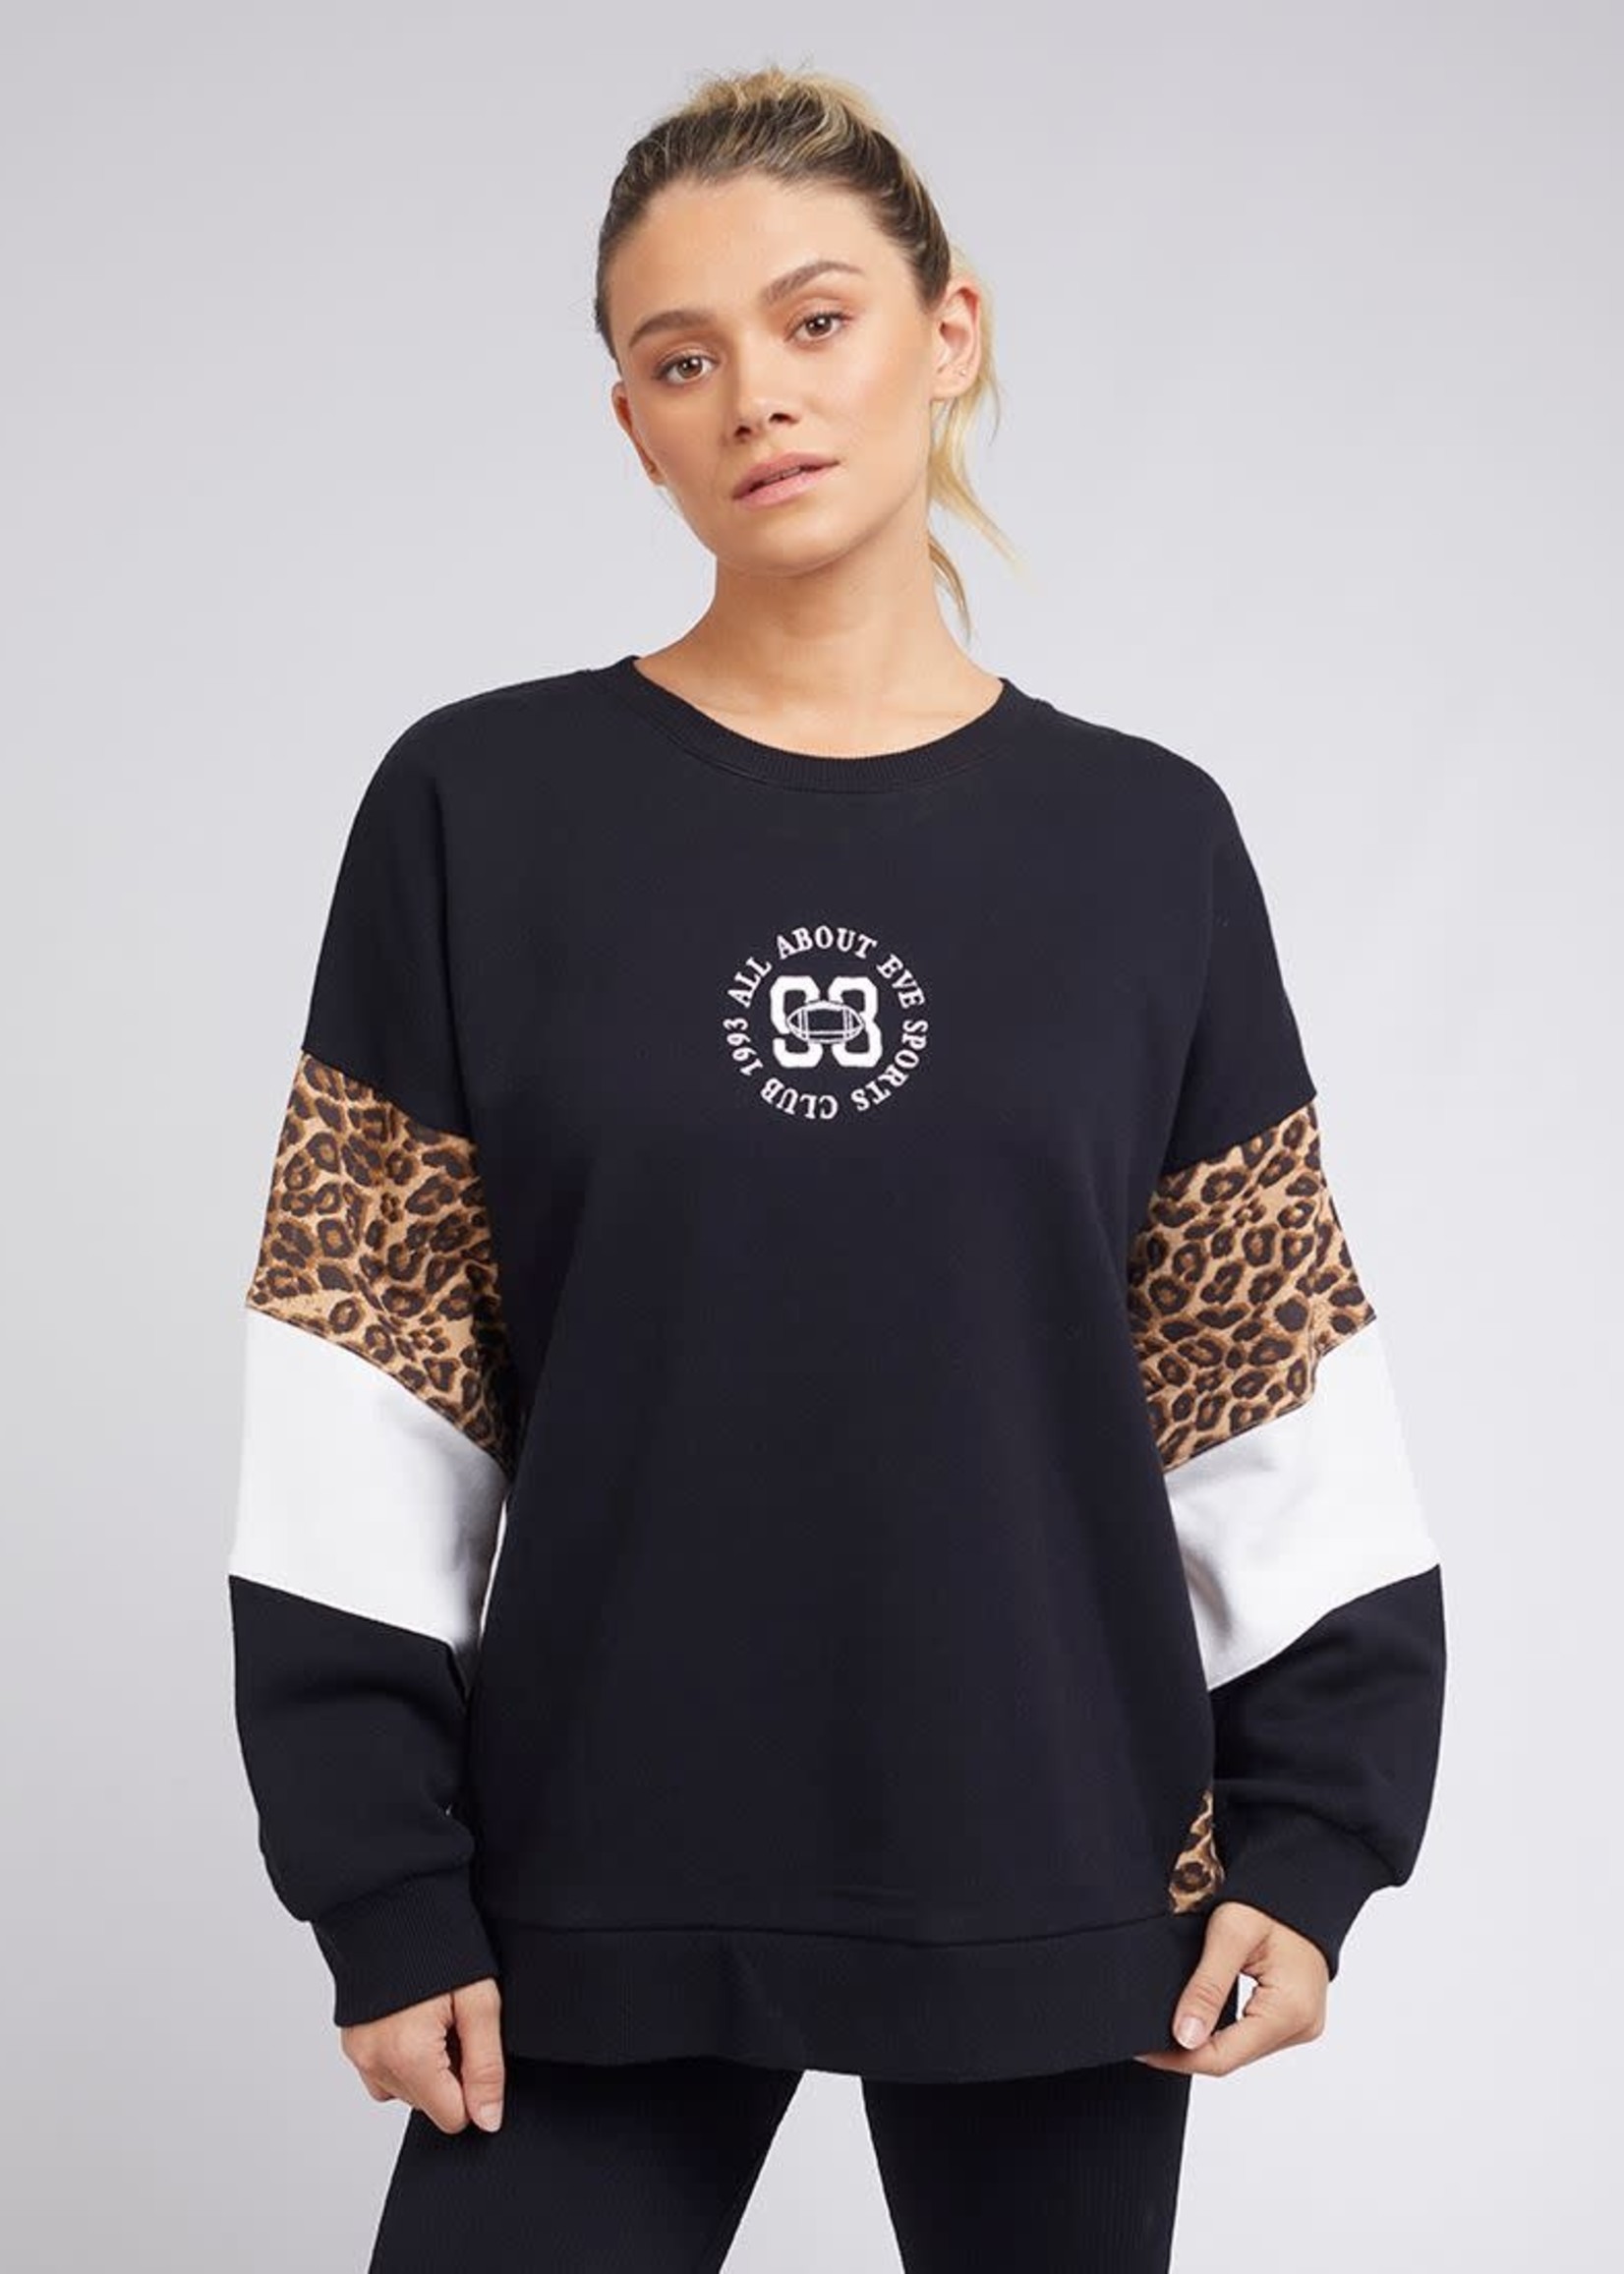 All About Eve Carter Leopard Panelled Crew